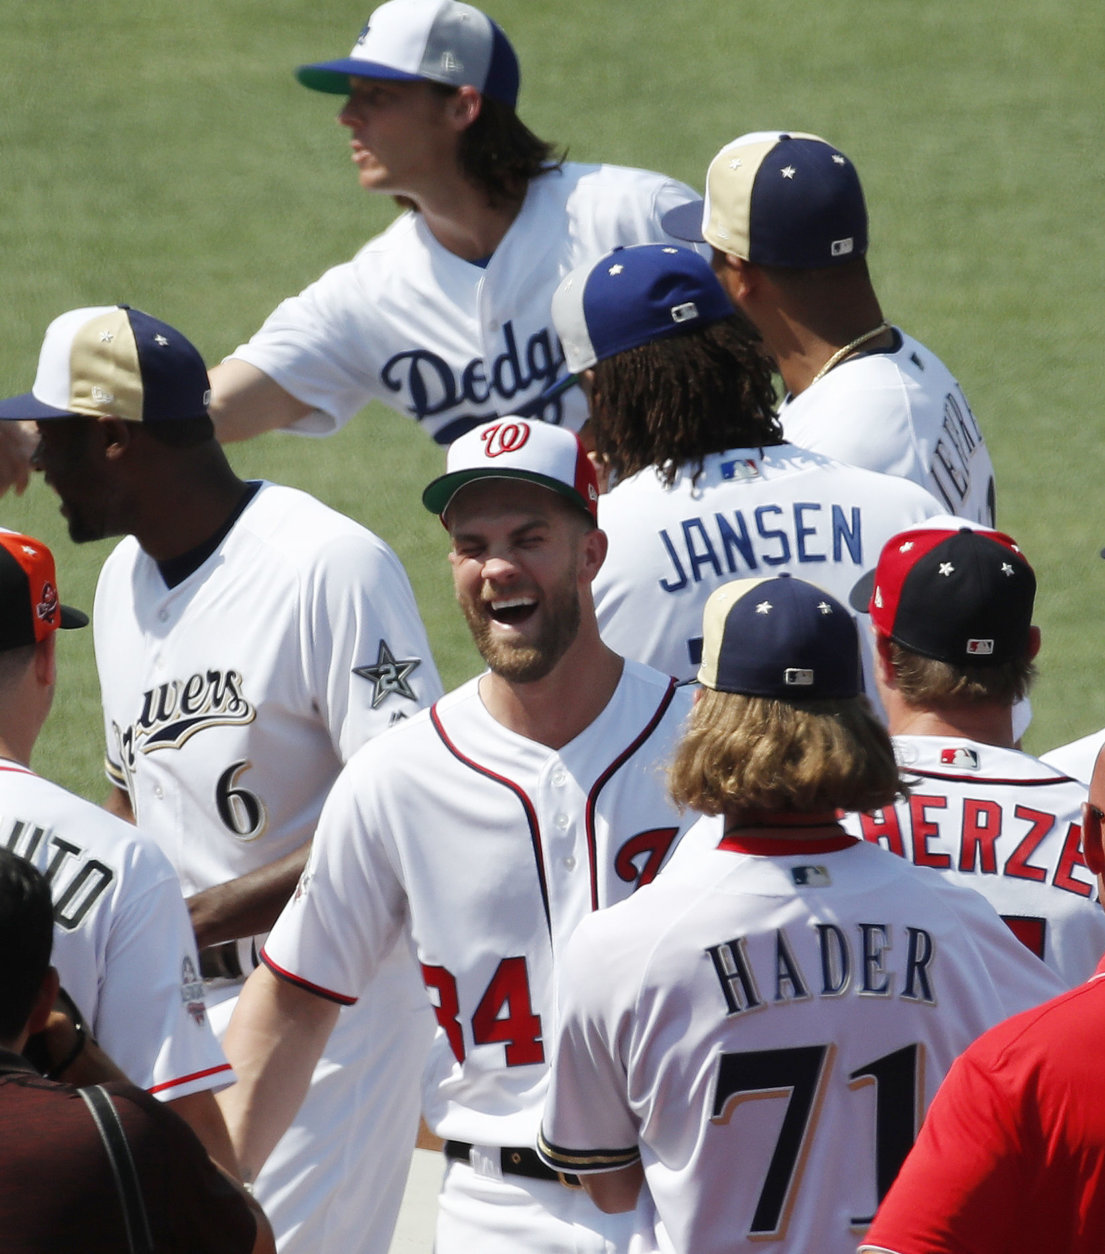 National League, Washington Nationals Bryce Harper, center, smiles as players mingle during a team photo, Monday, July 16, 2018, at Nationals Park, in Washington. The the 89th MLB baseball All-Star Game will be played Tuesday. (AP Photo/Alex Brandon)